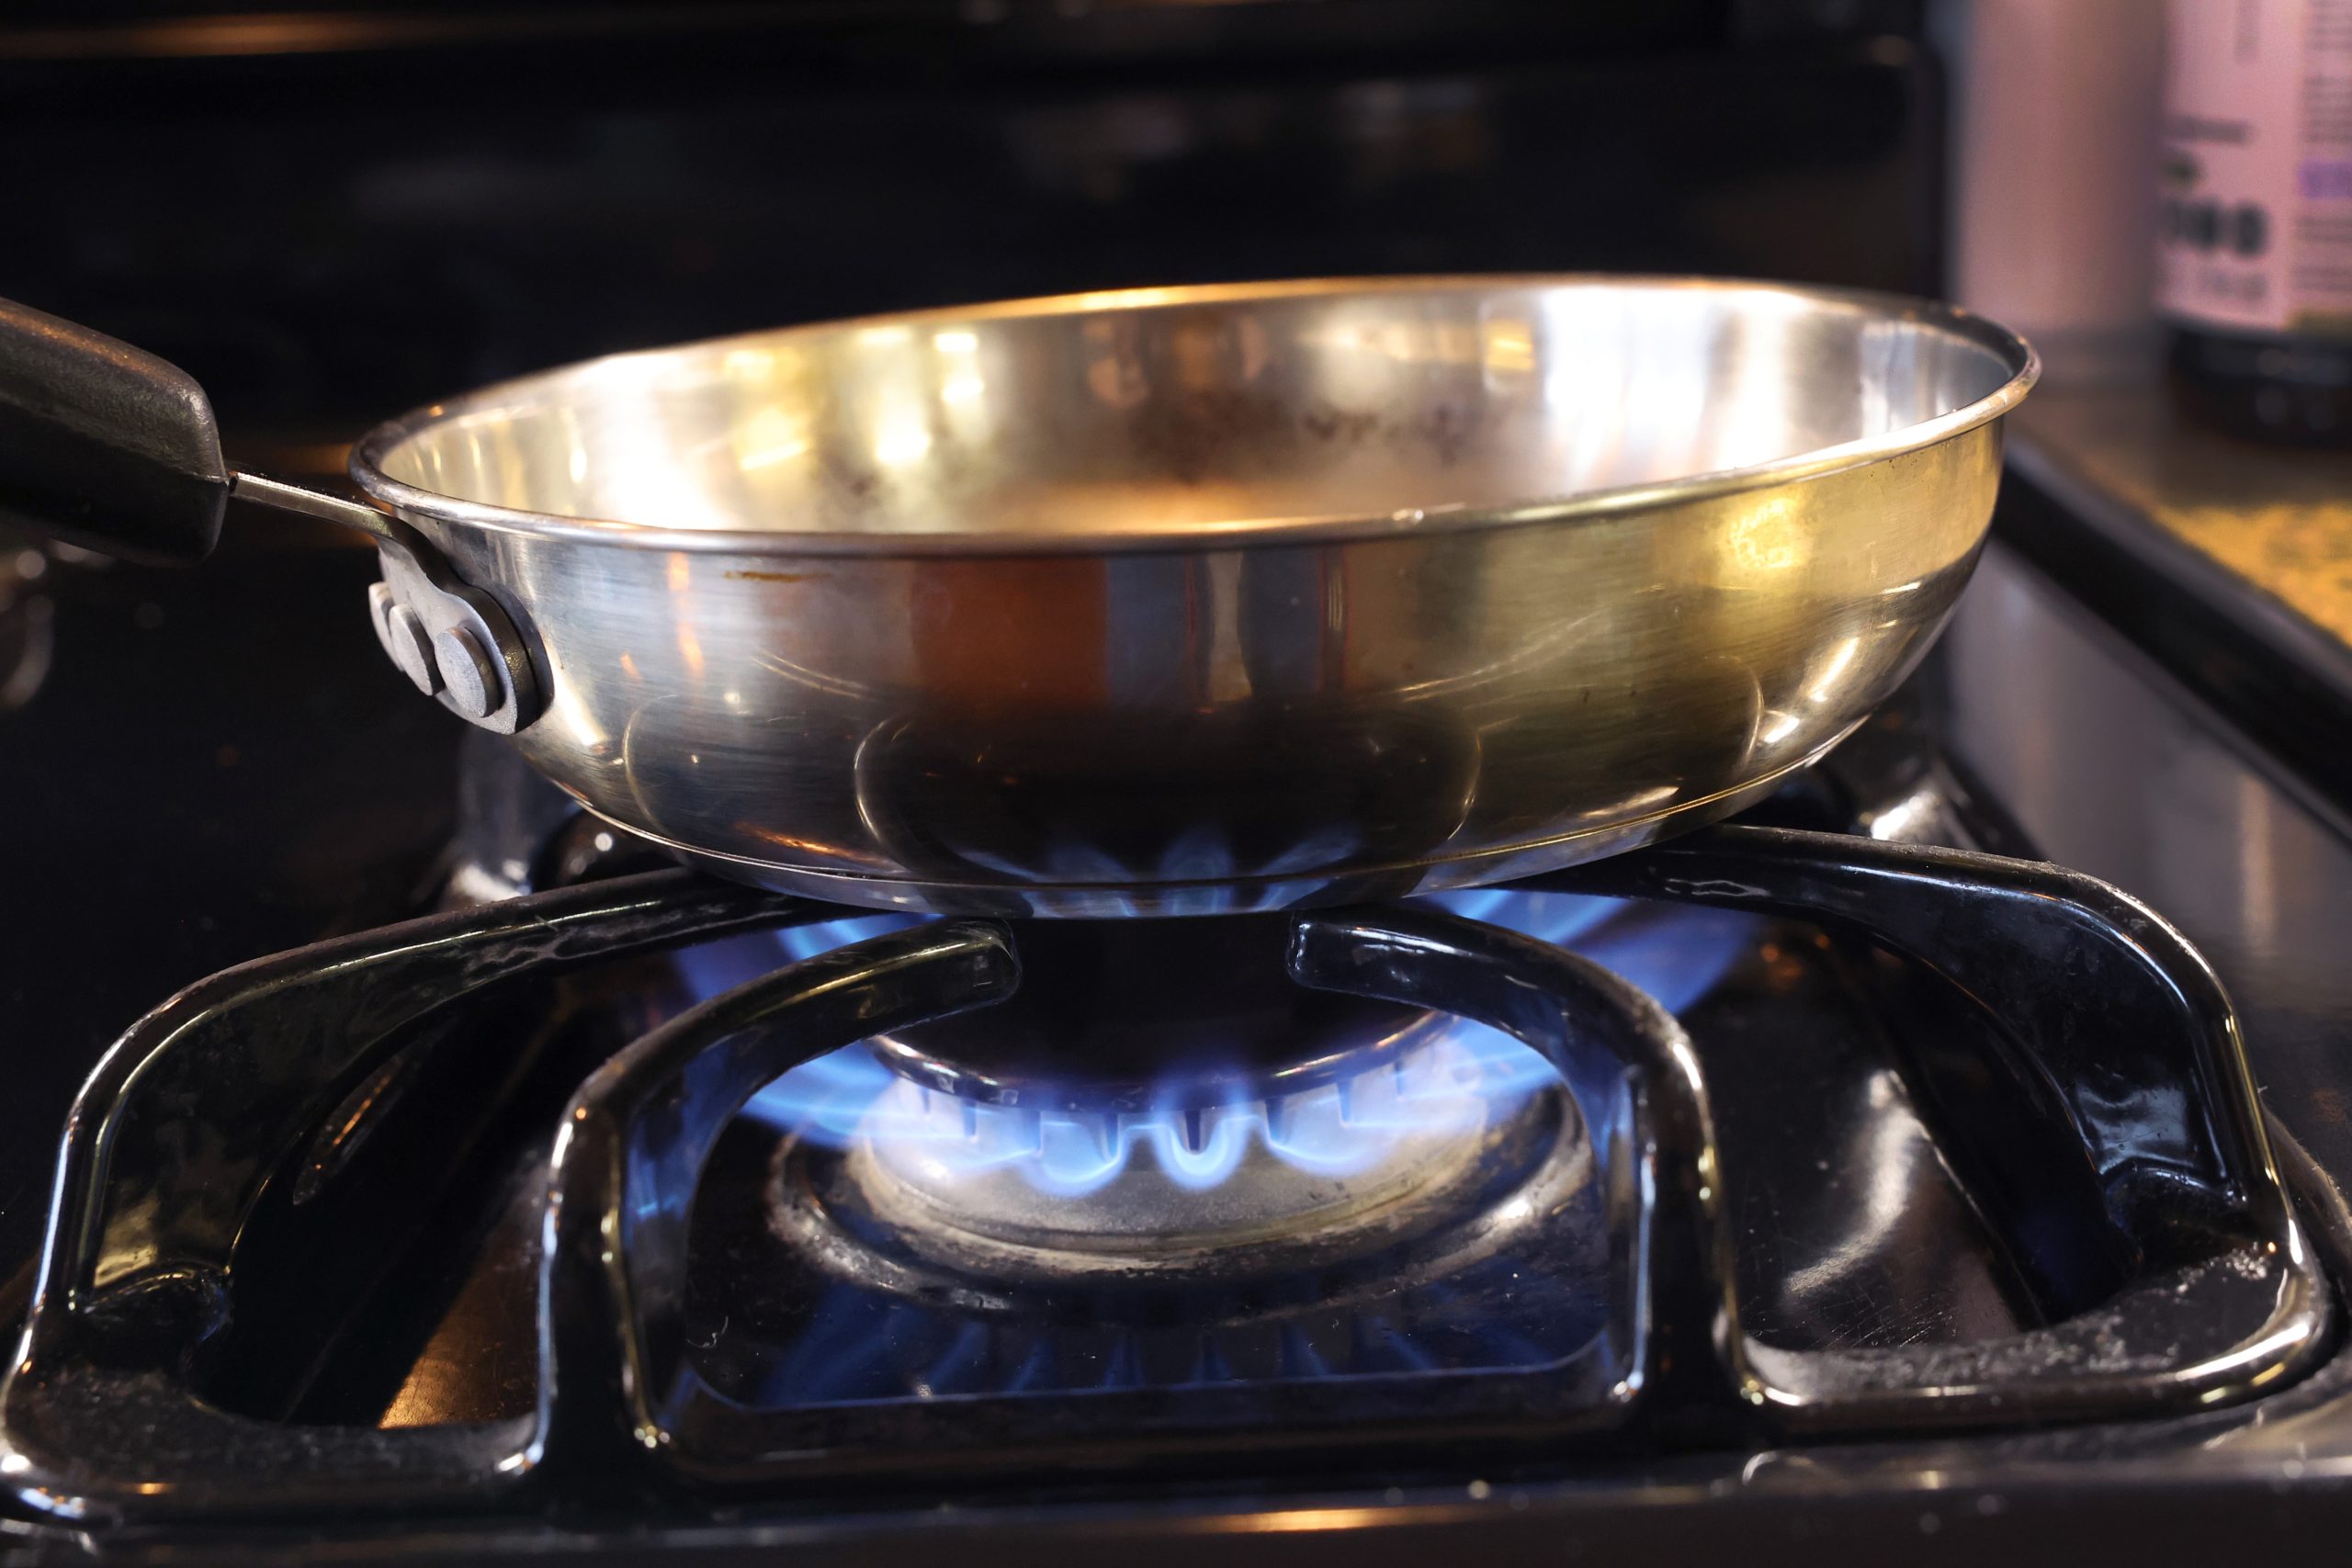 What’s real behind the gas stove kerfuffle?